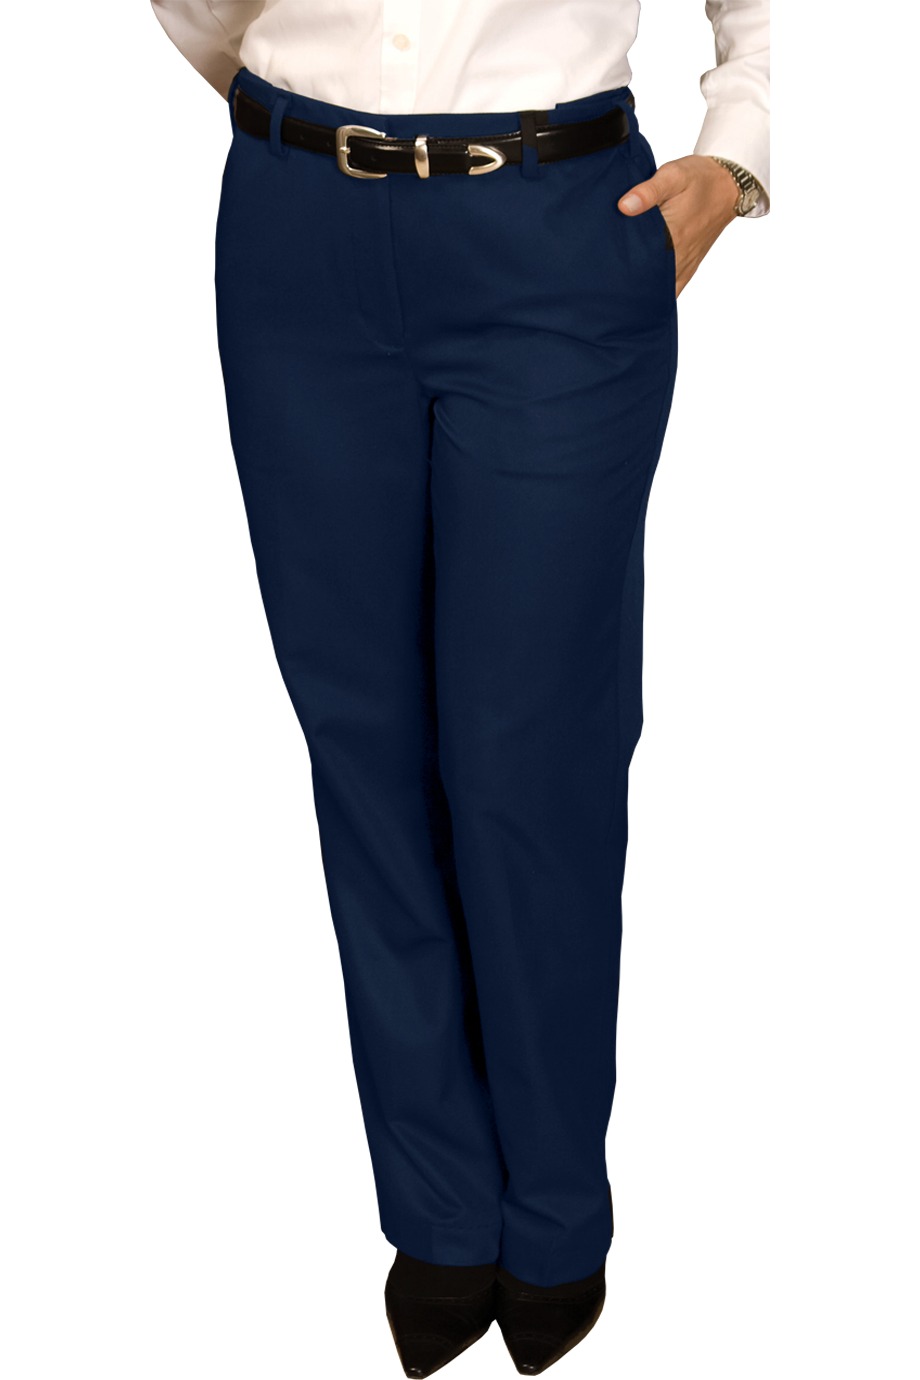 Edwards Garment 8579 - Women's Blended Chino Flat Front Pant